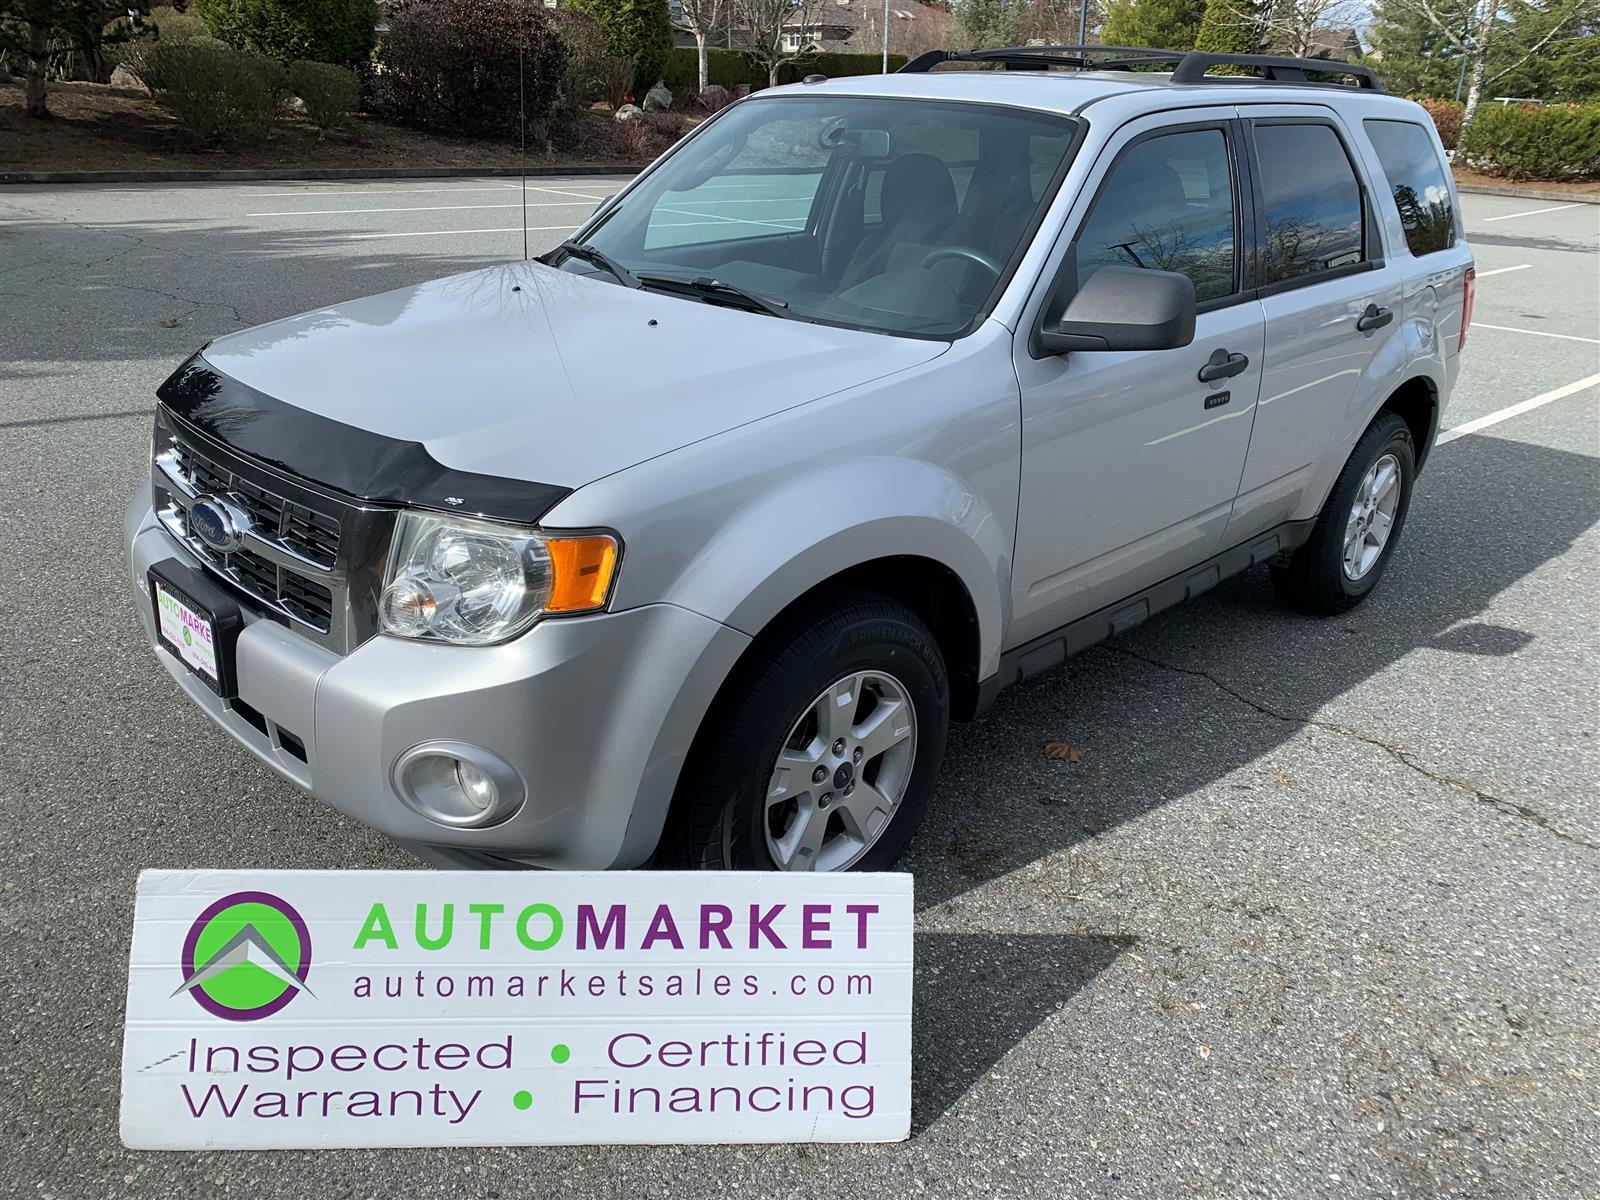 2009 Ford Escape XLT AUTO P/GROUP FINANCING, WARTRANTY INSPECTED W/